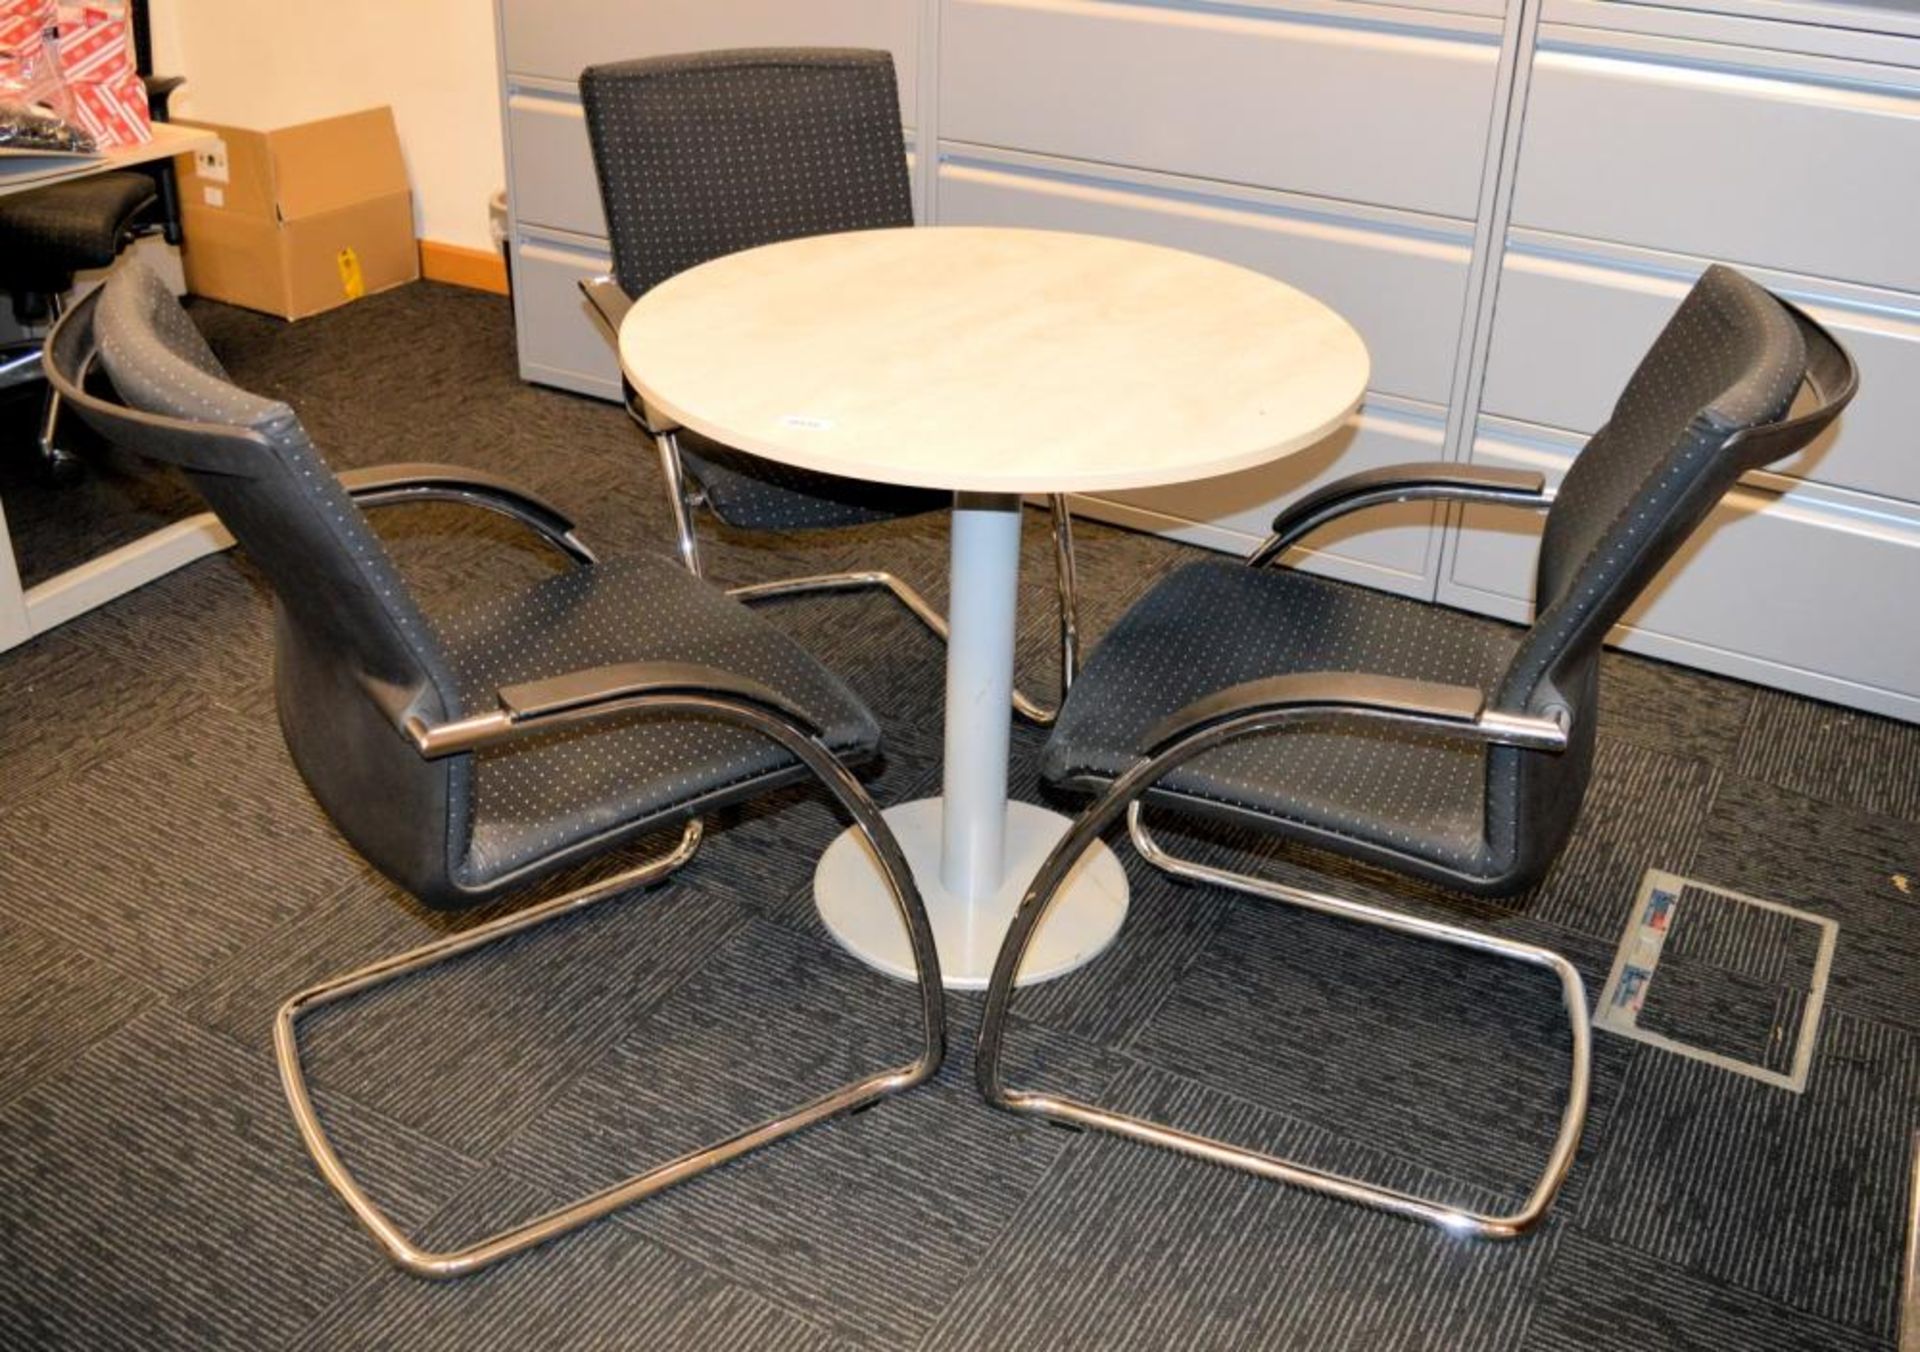 8 x Stackable Boardroom Meeting Chairs in Black With Chrome Stands and Arm Rests - Contemporary - Image 7 of 7